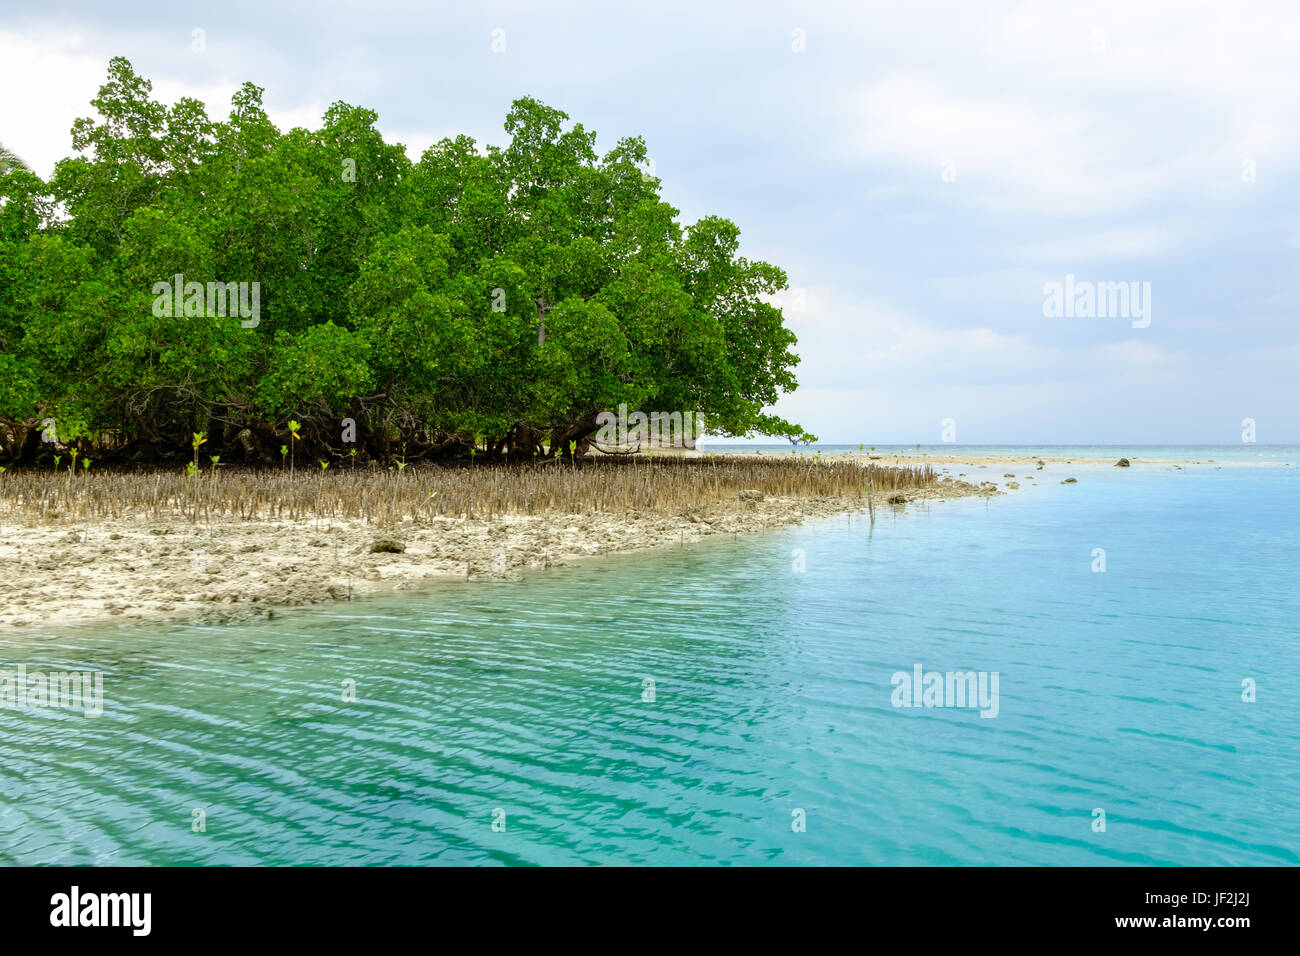 Mangrove forest Stock Photo